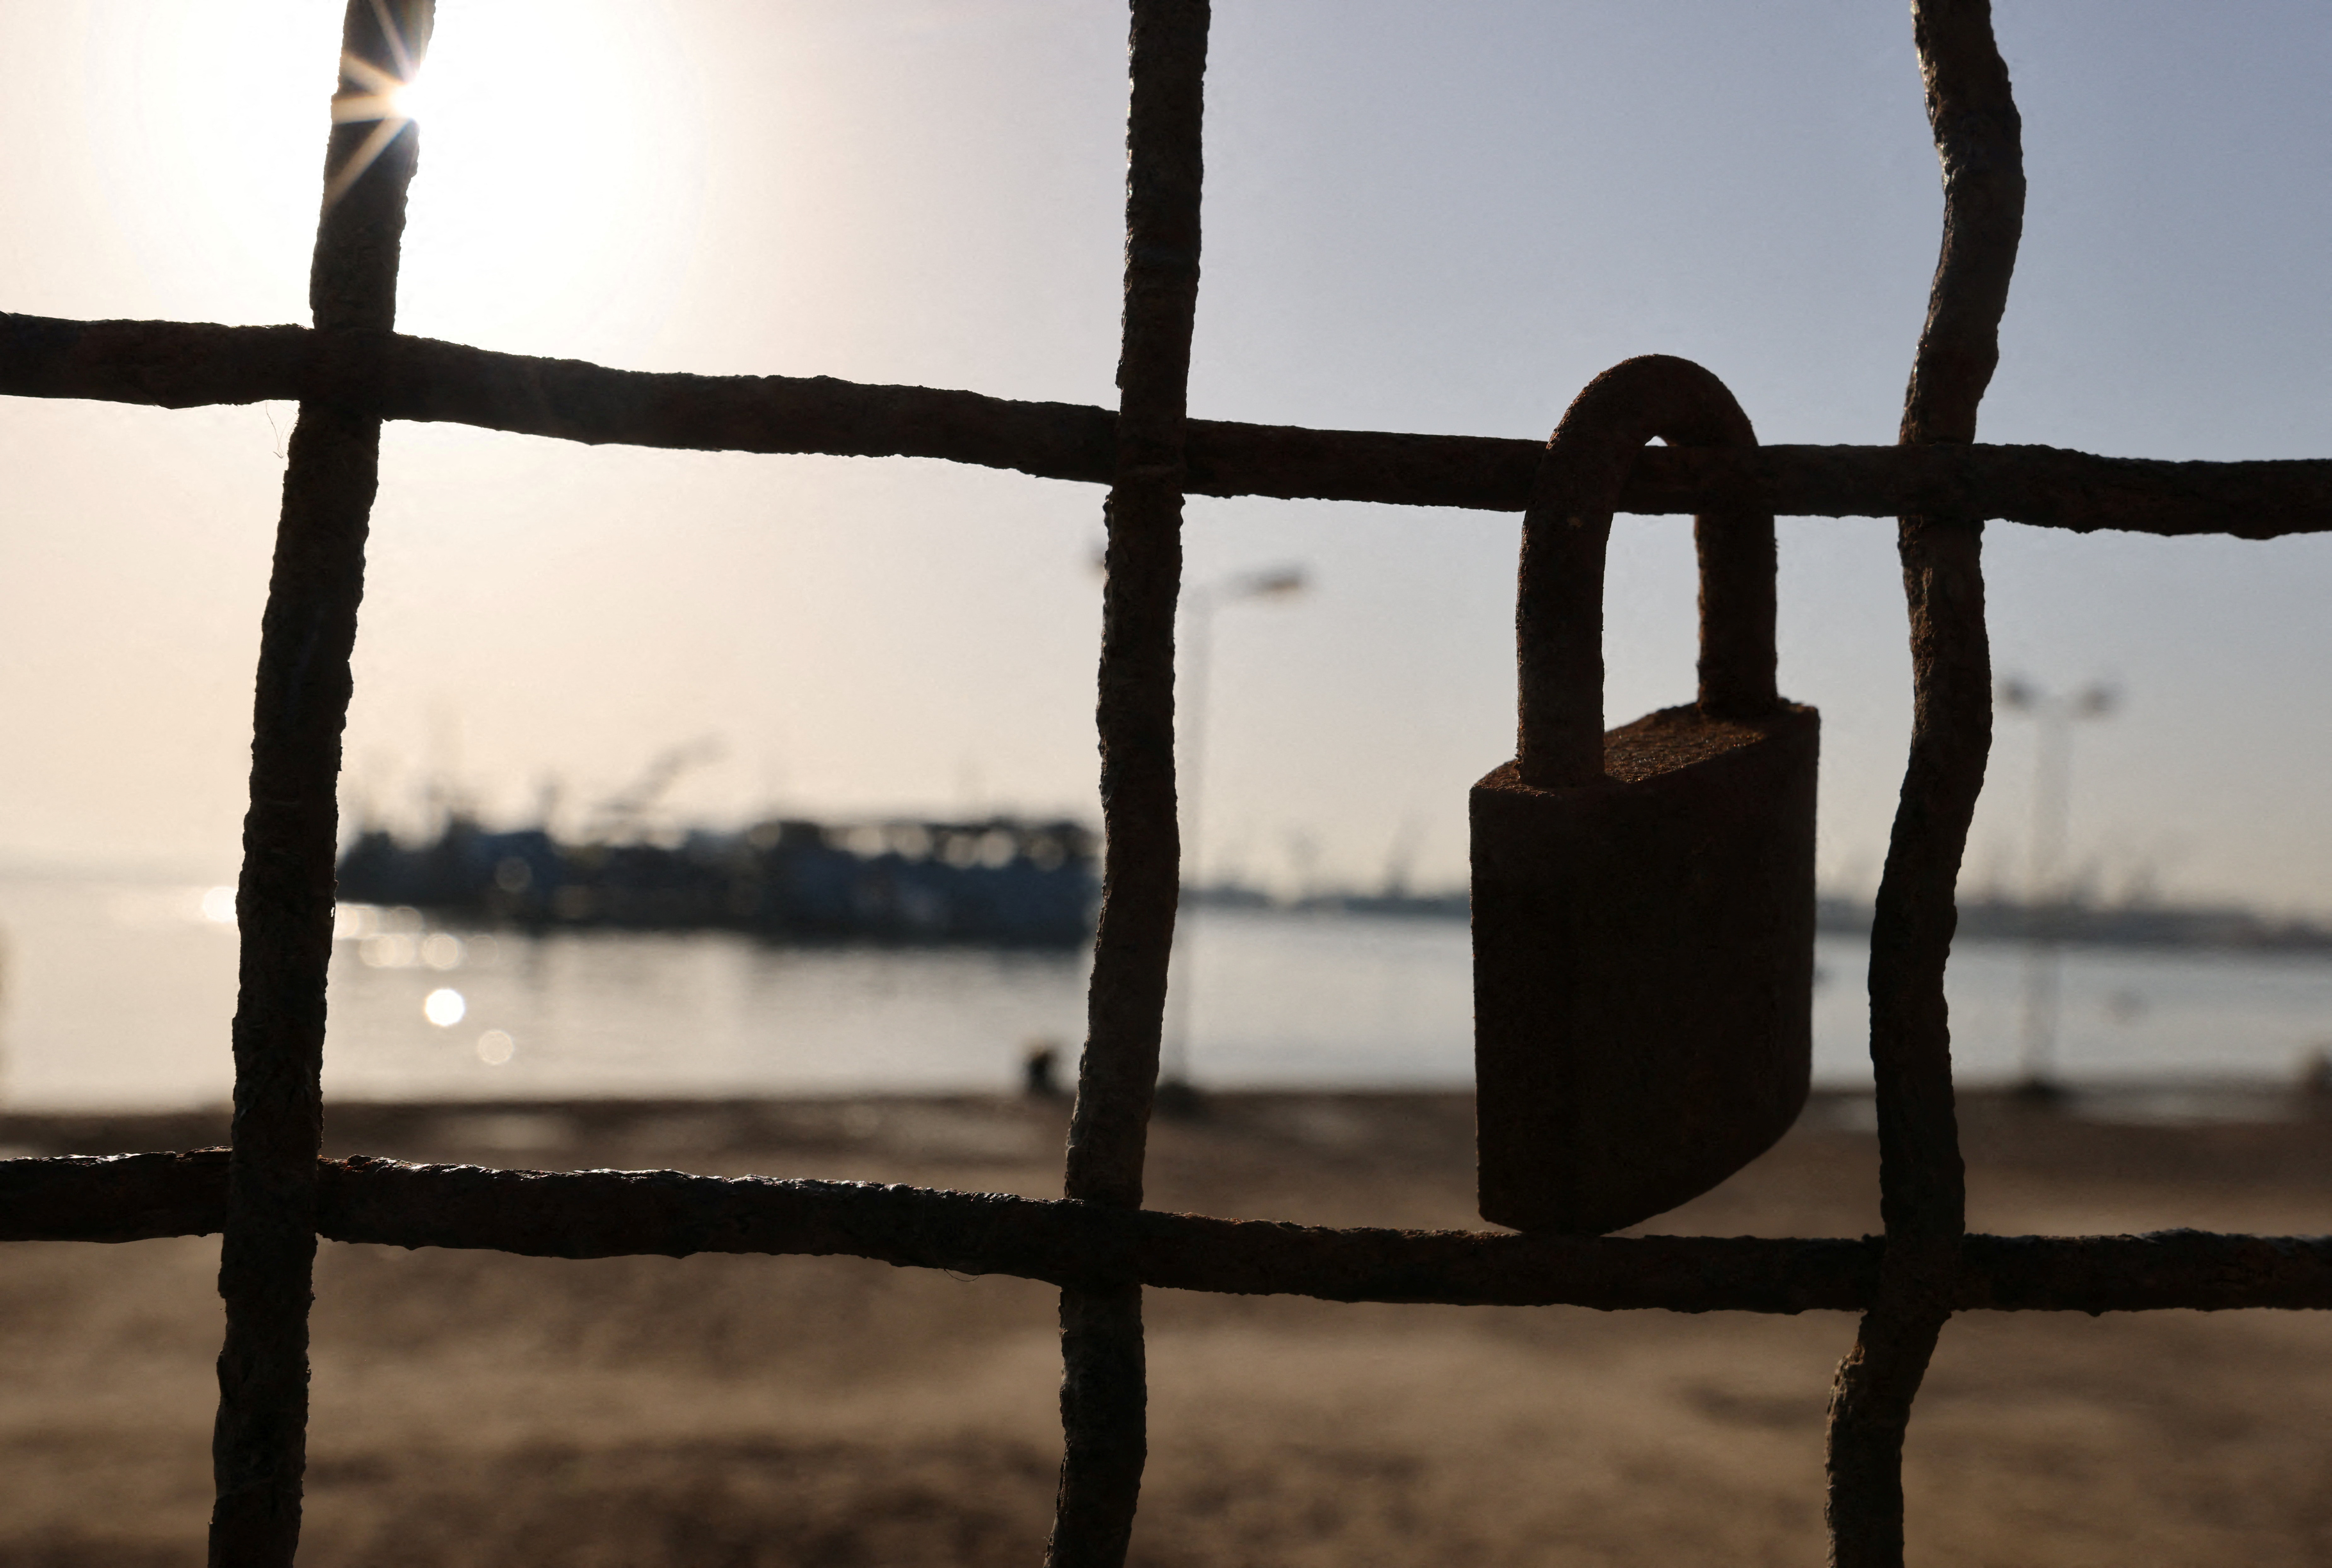 A "love lock" hangs on a metal fence near the canal of Port Said